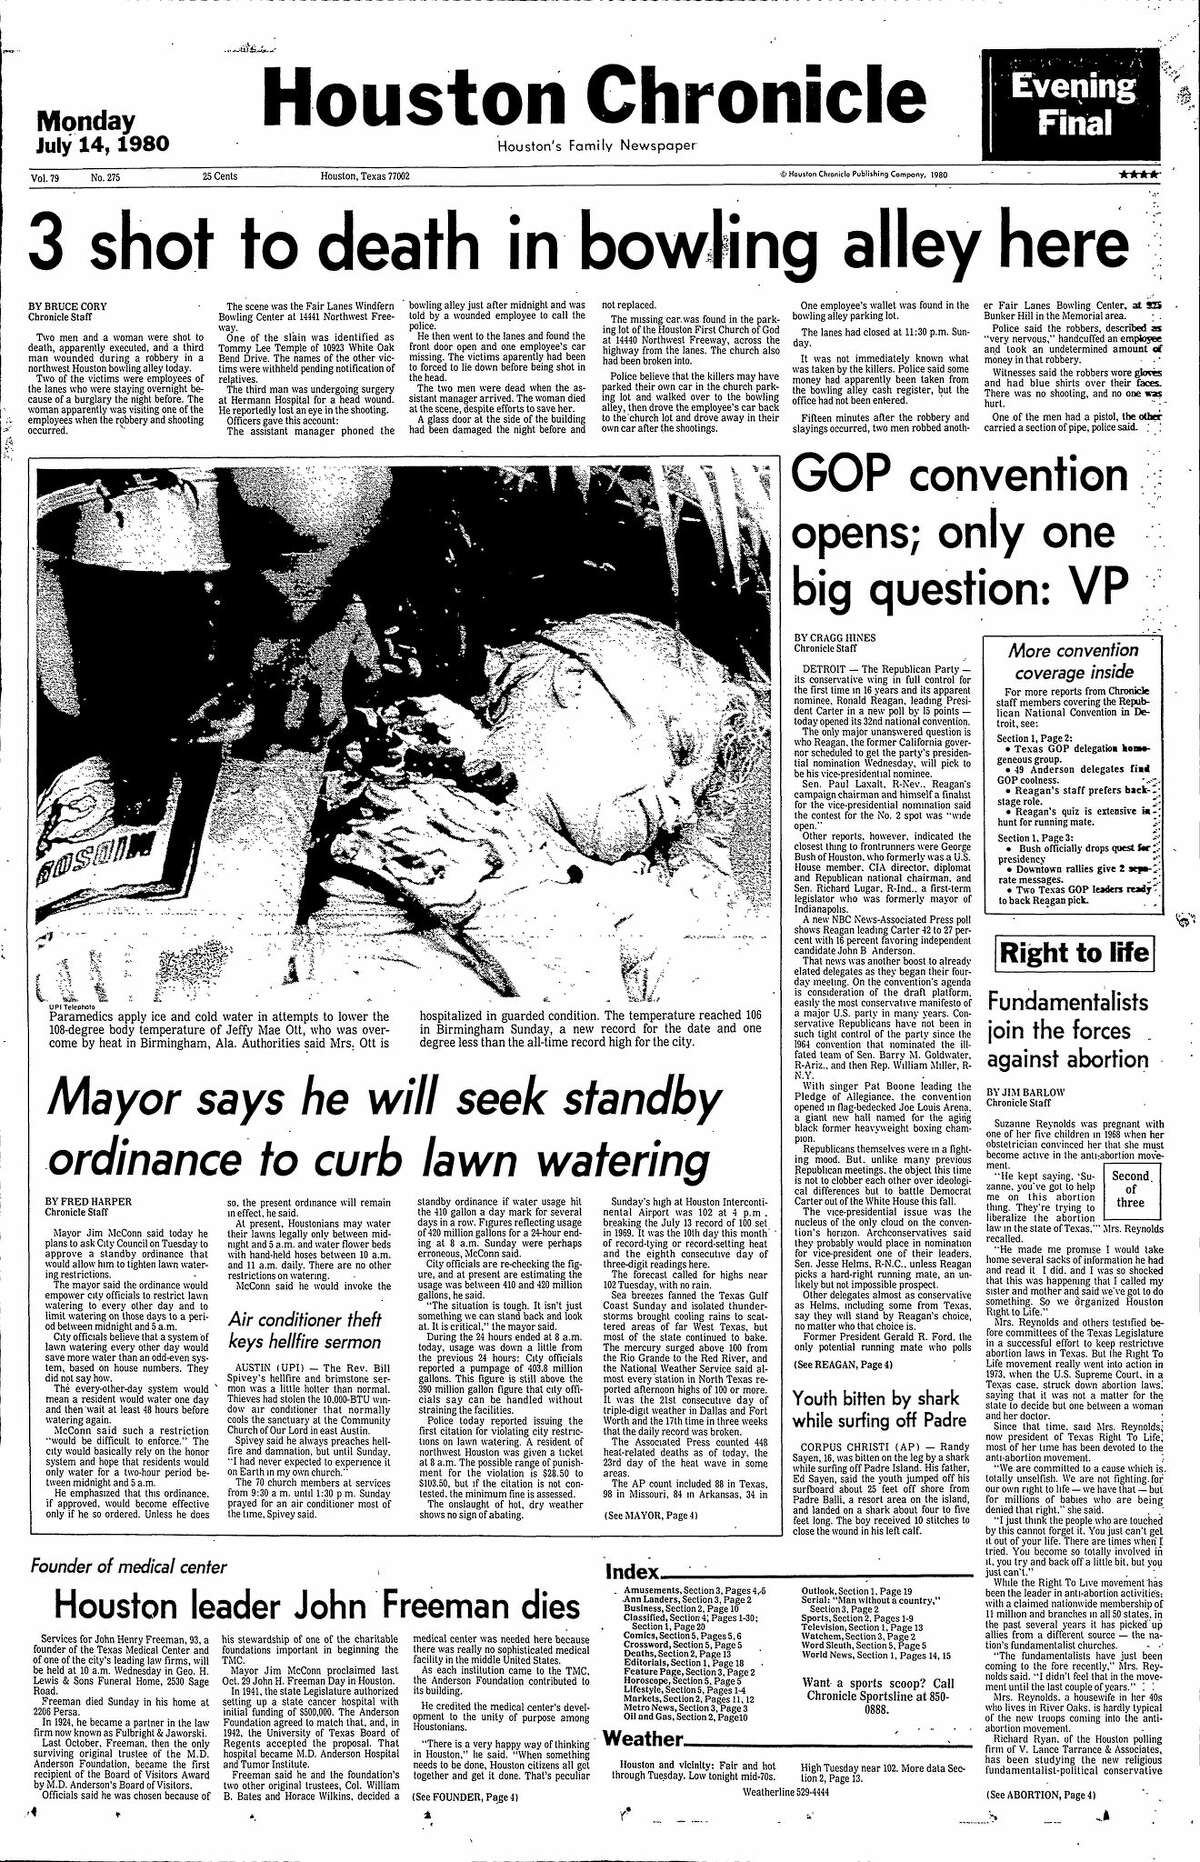 Houston Chronicle front page from July 14, 1980.